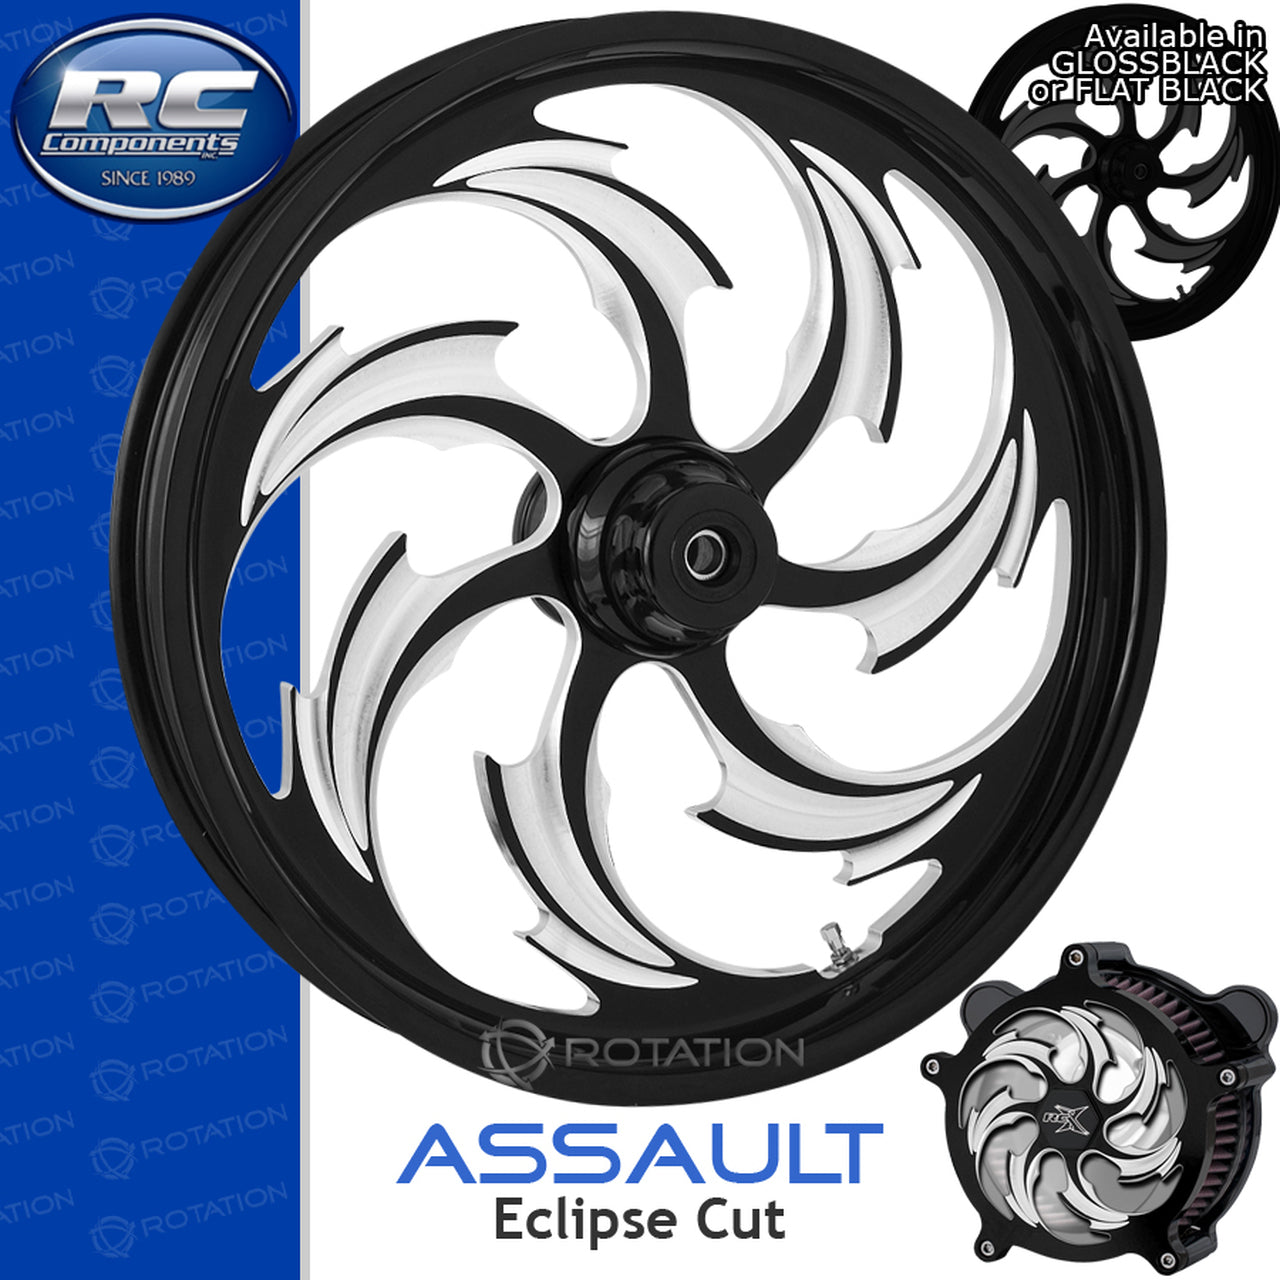 RC Components Assault Eclipse Touring Wheel